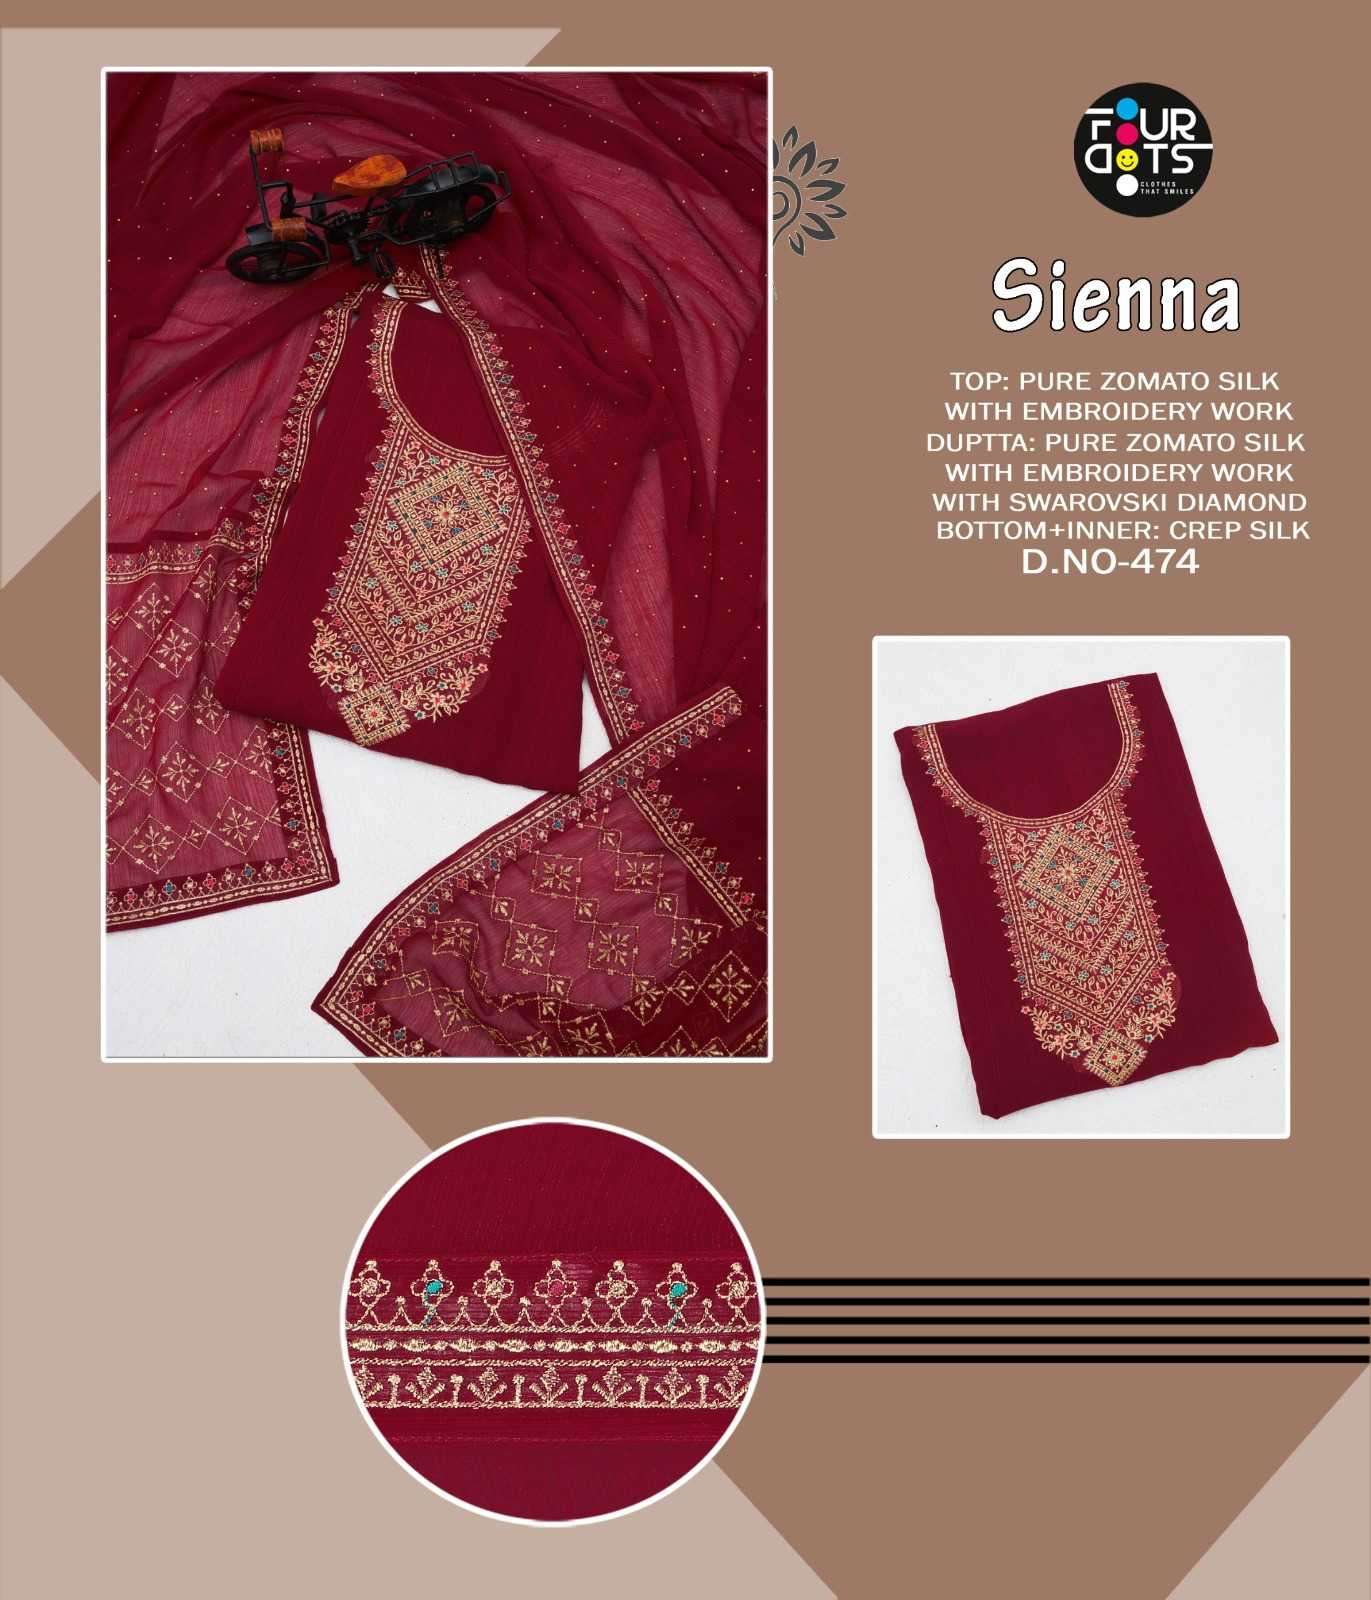 fourdots sienna Pure Zomato Silk With Embroidery Work suit